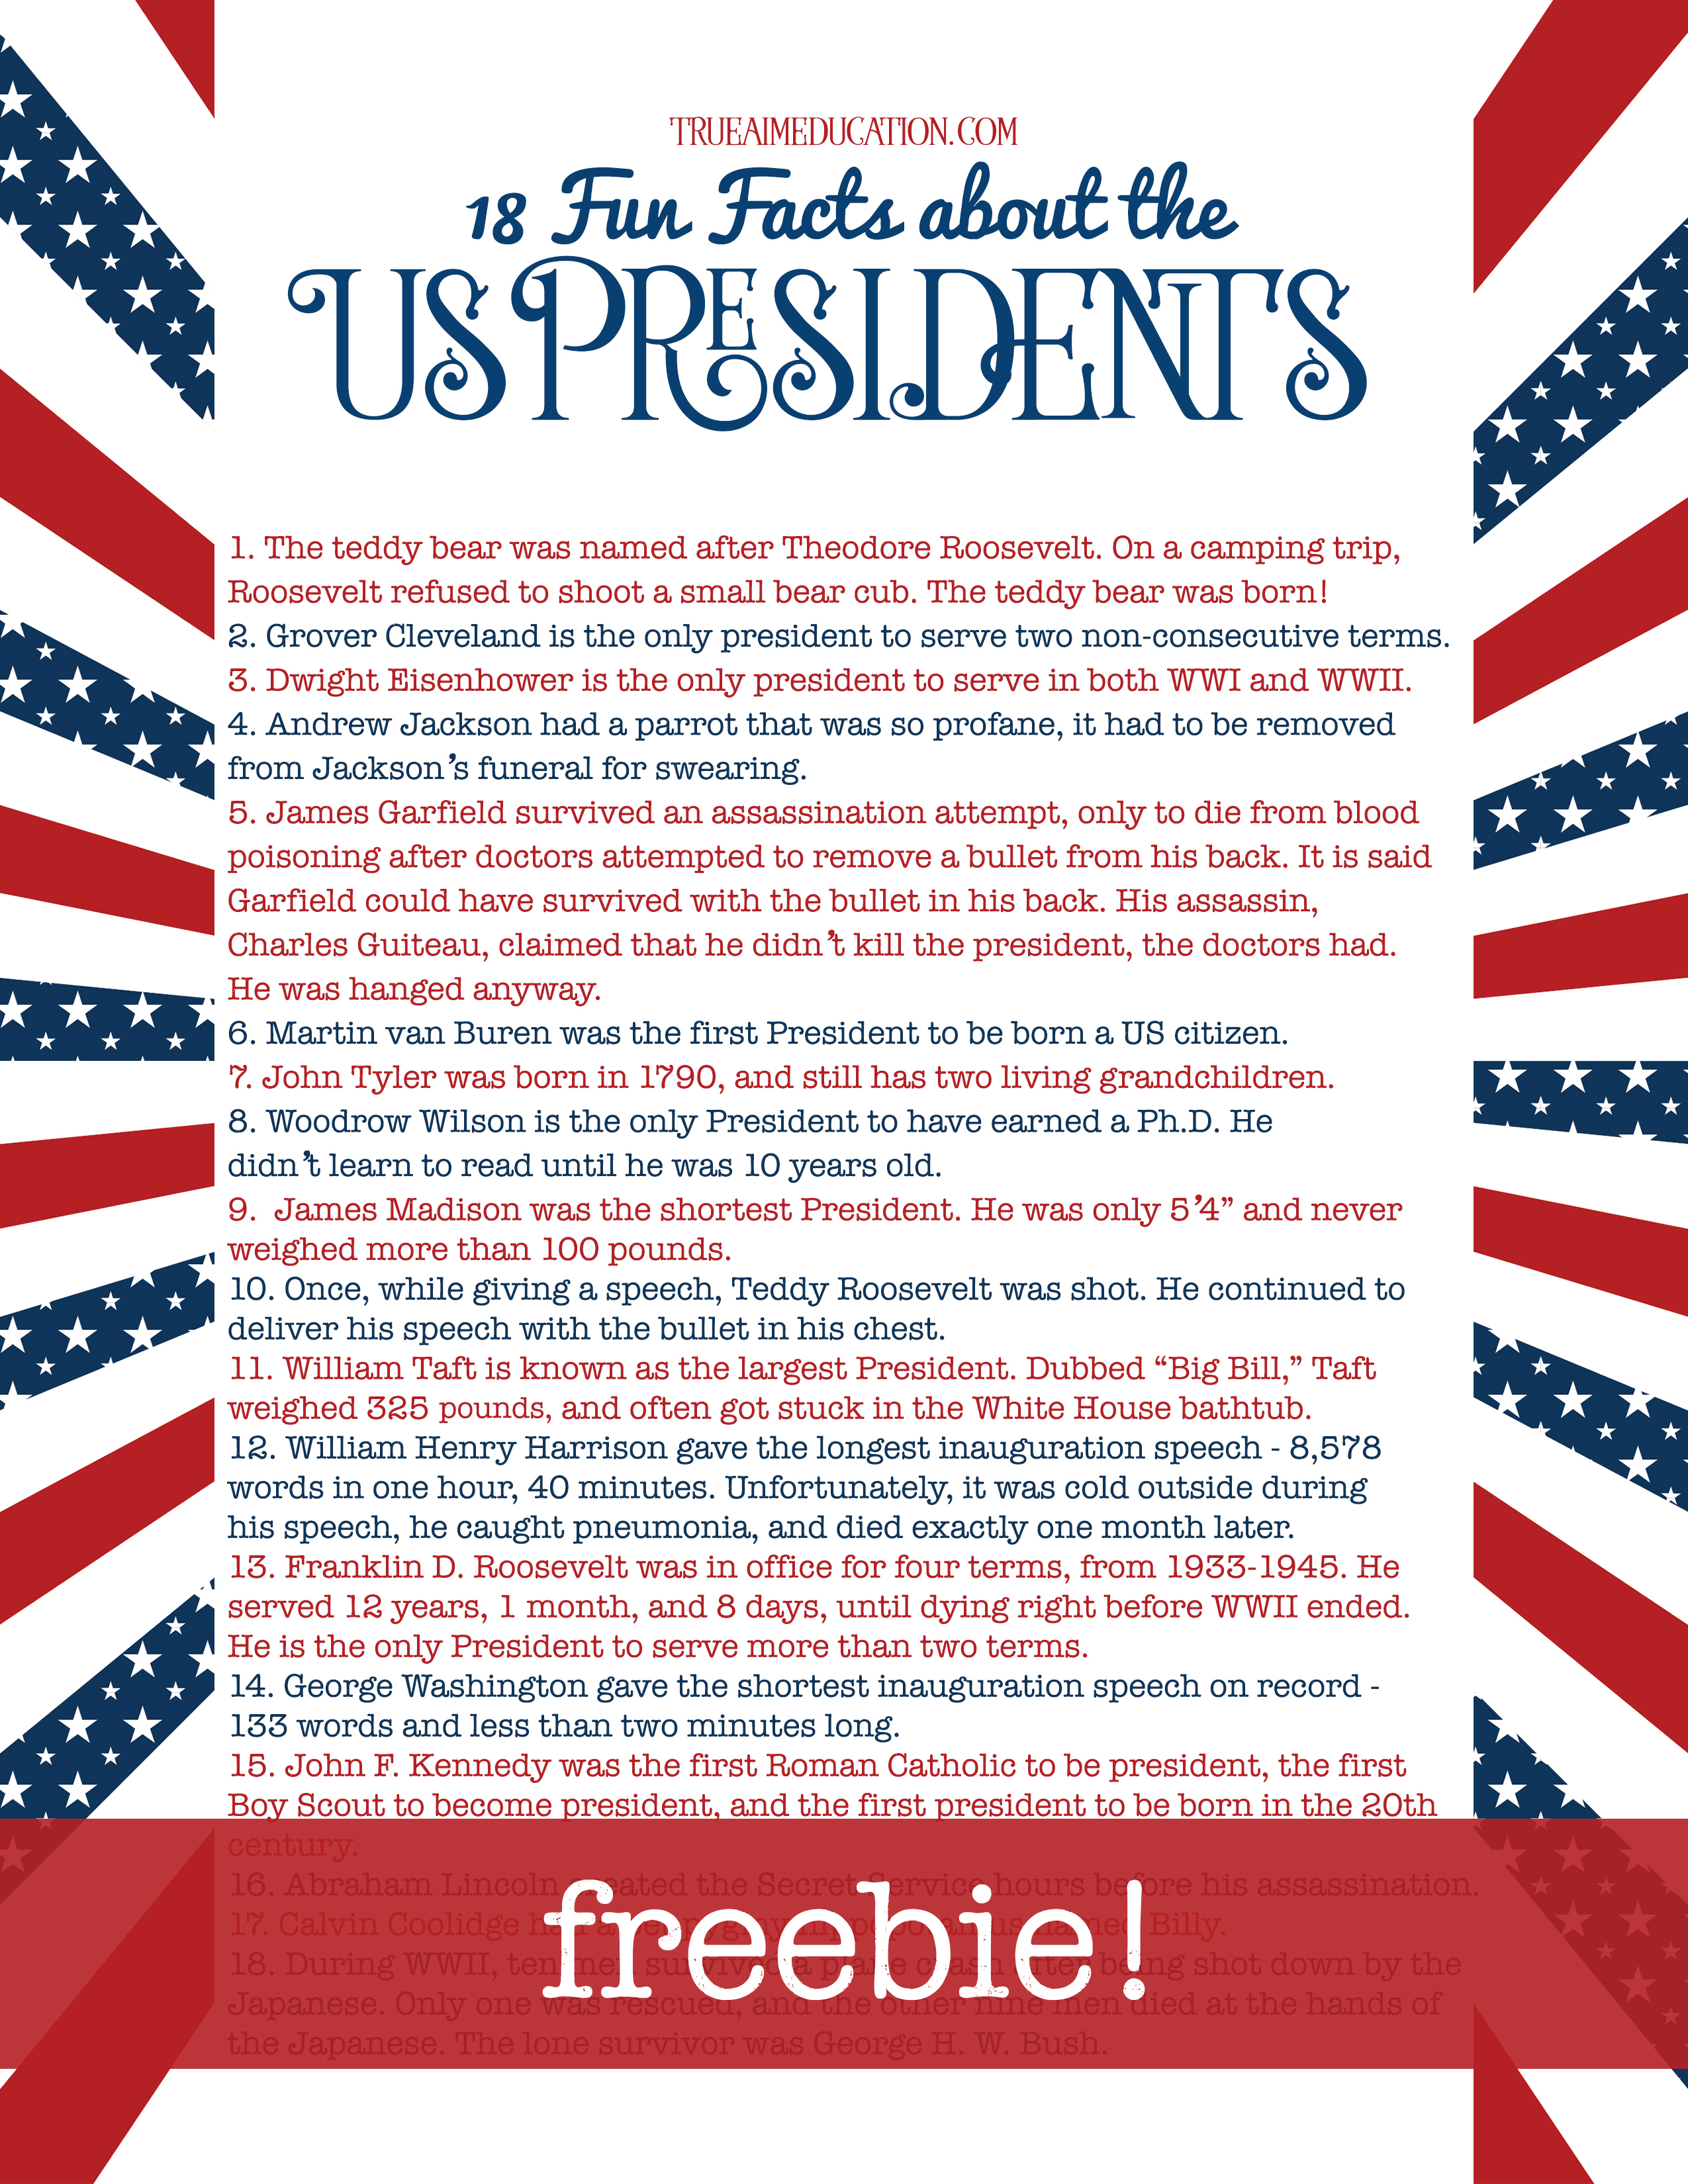 List of Presidents Freebie, with 18 Fun Facts about the Presidents for homeschool or classroom study.